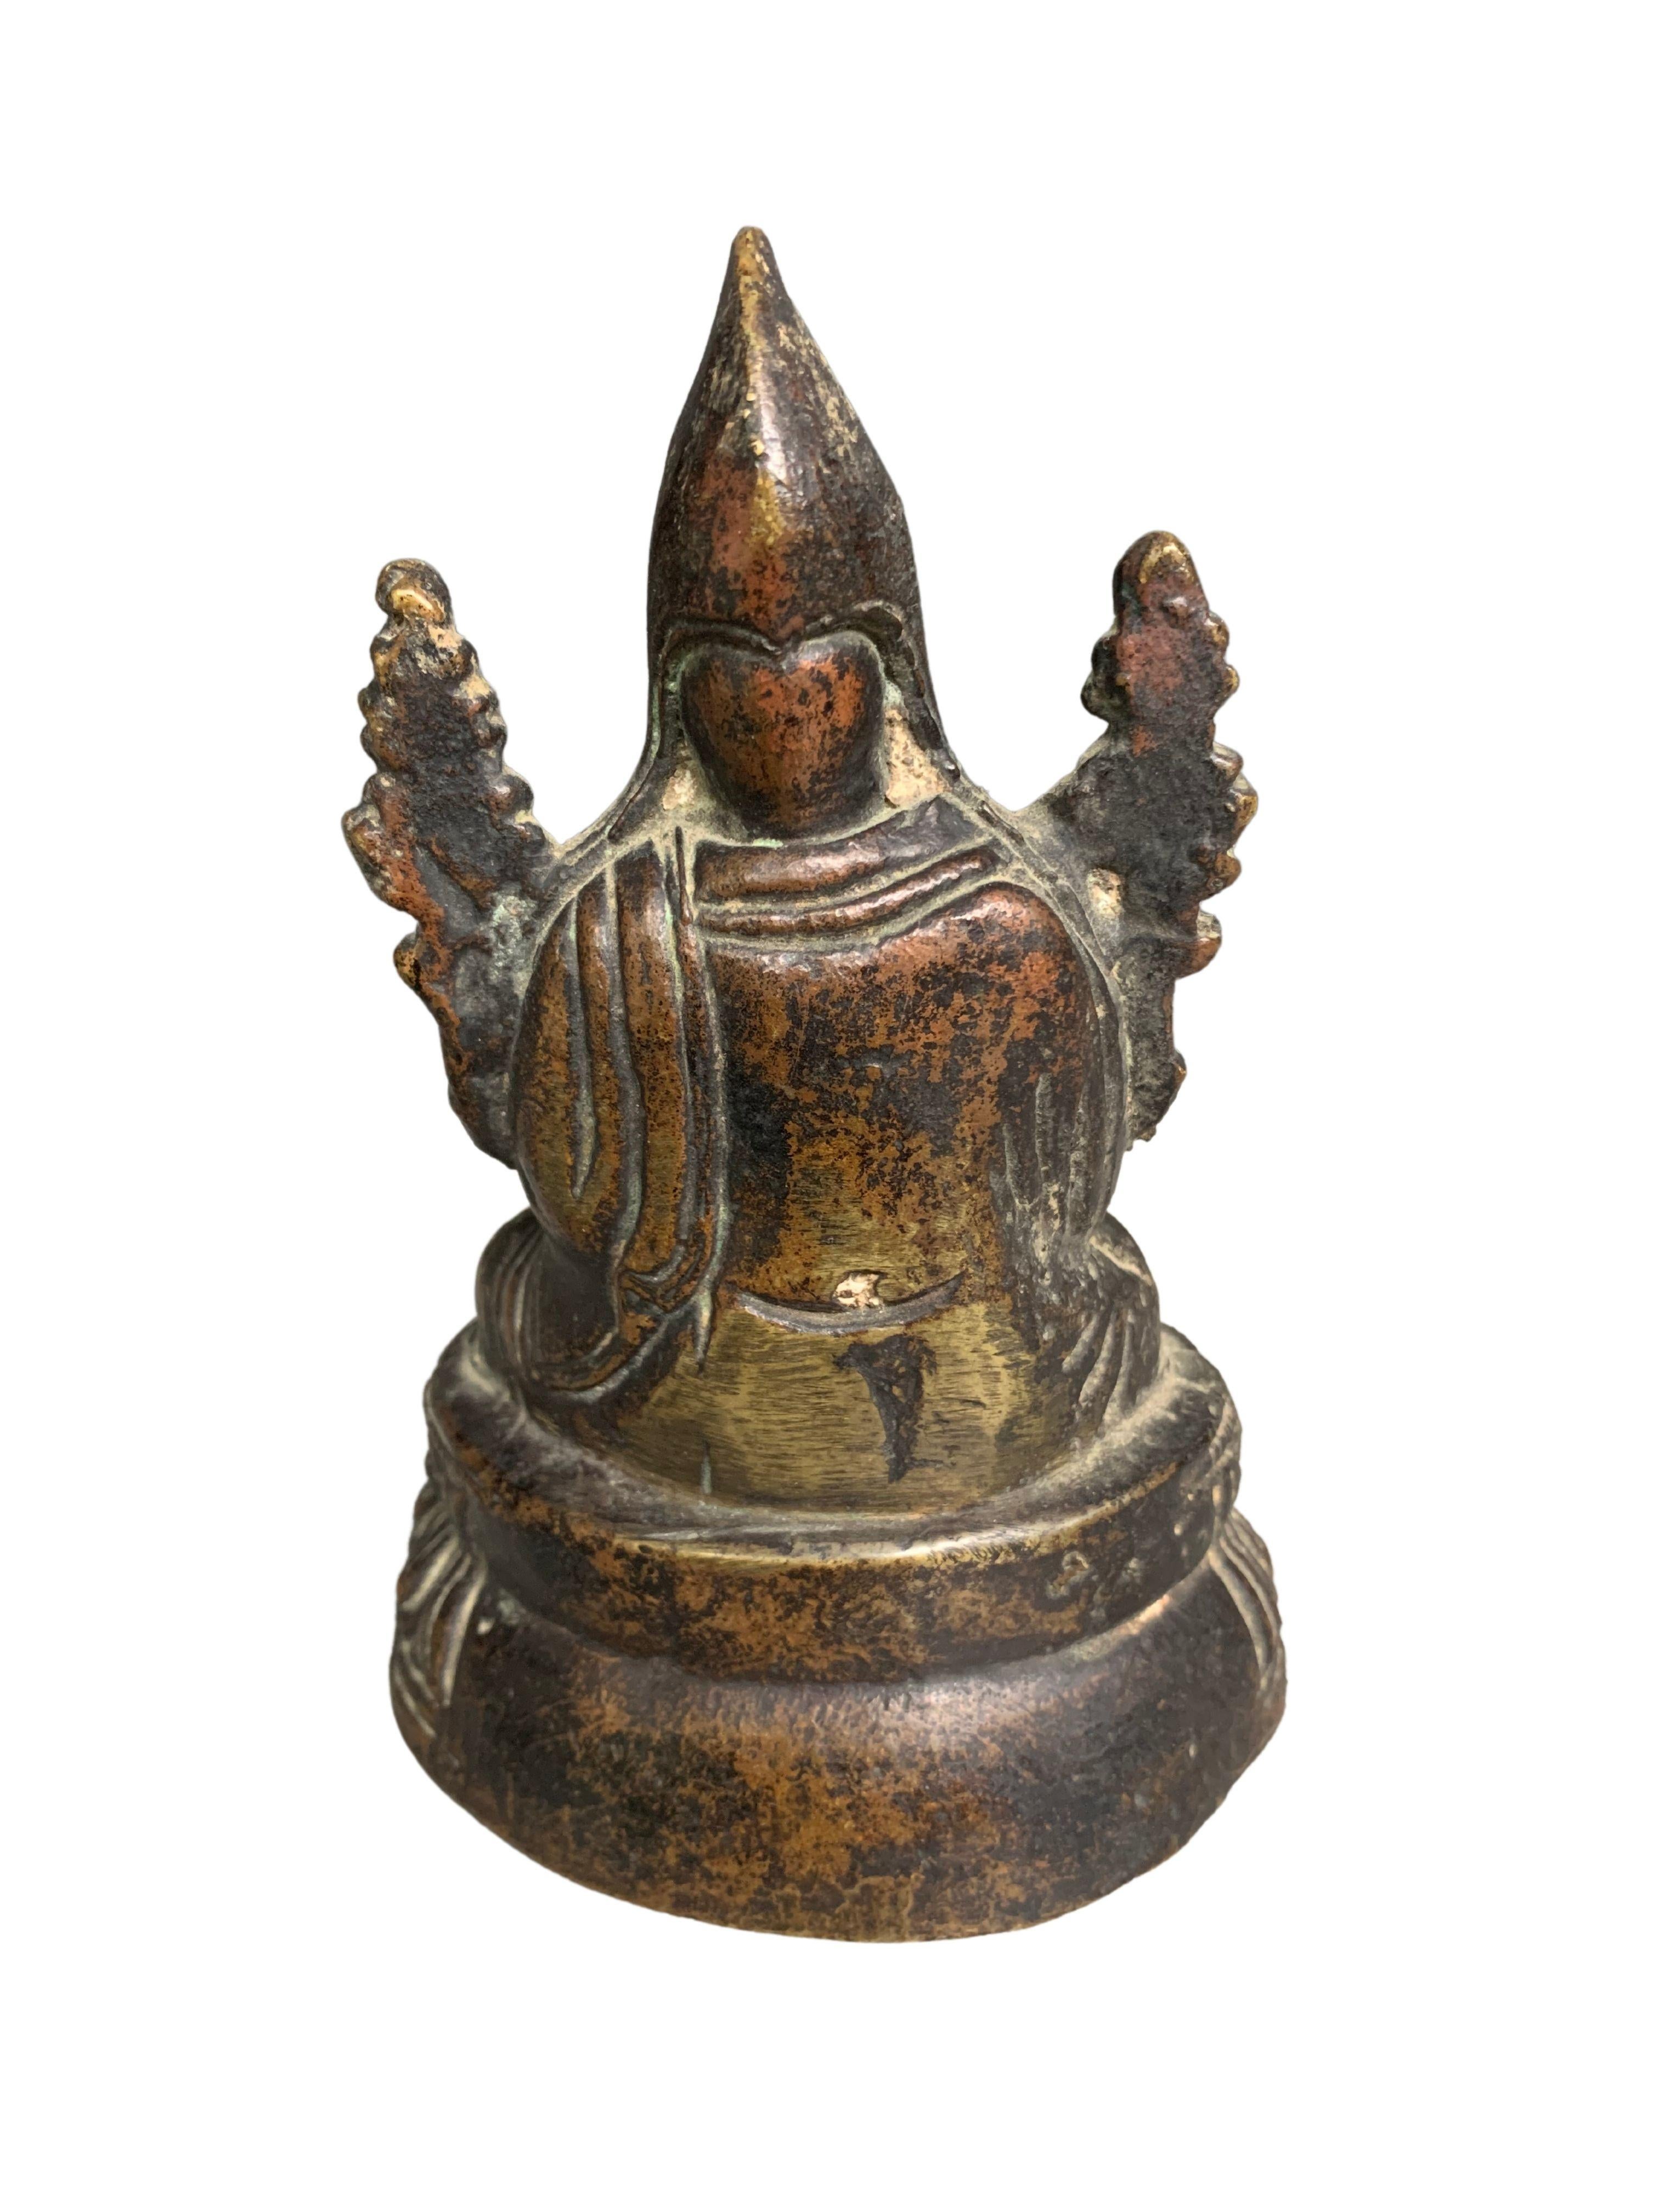 Other Small Tibetan Seated Buddha from Bronze, c. 1850 For Sale